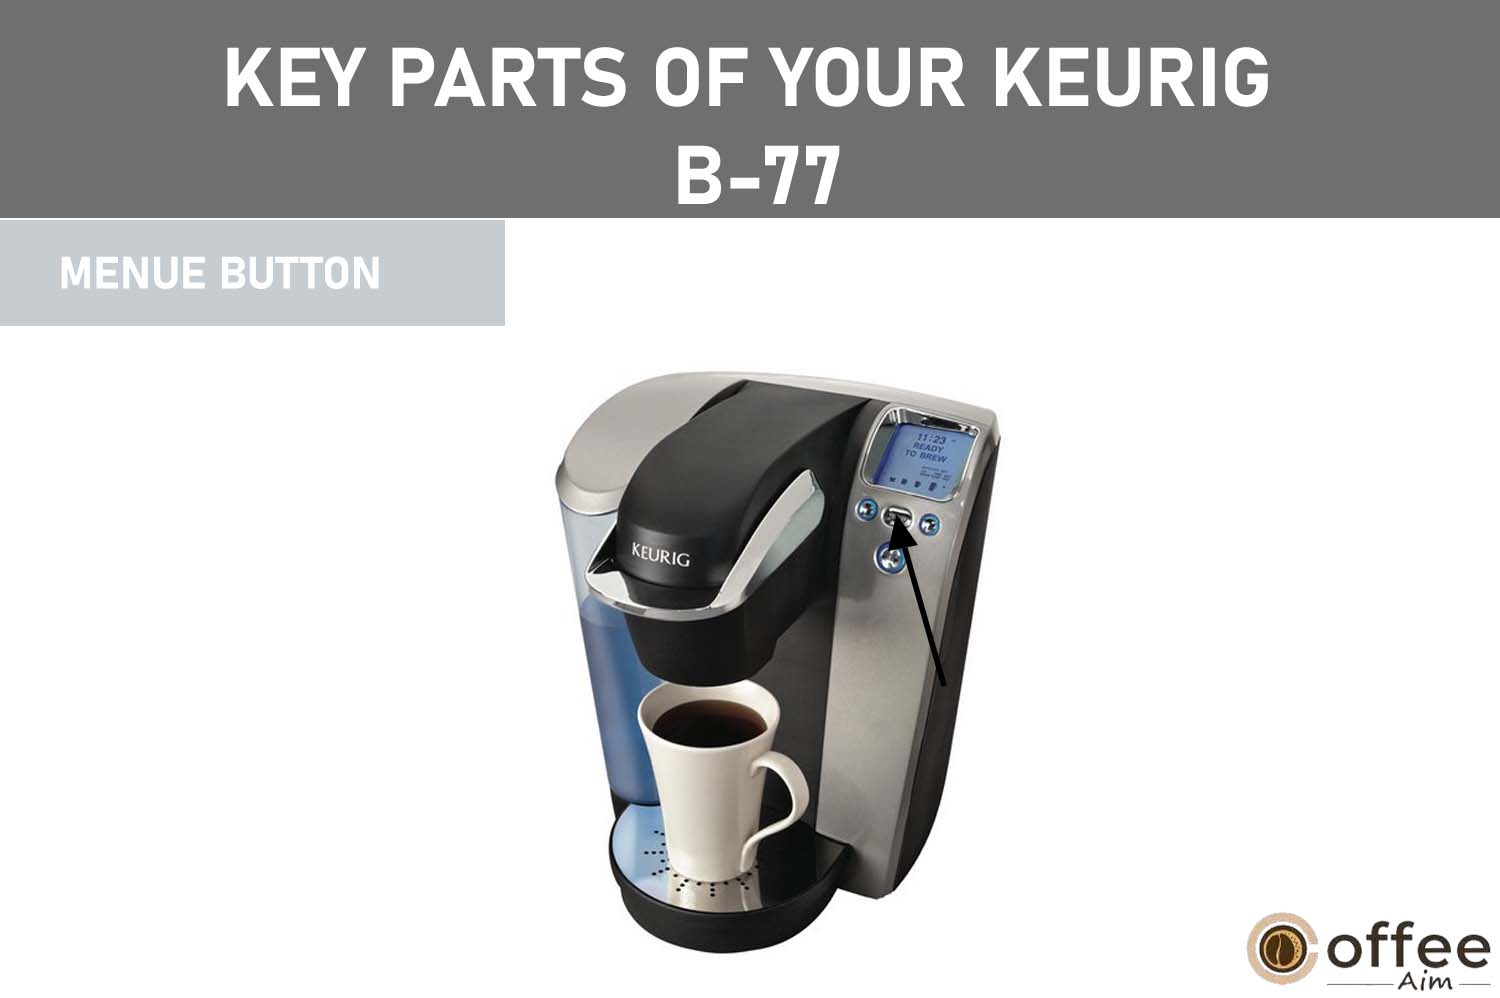 The menu button on the Keurig B-77 allows access to various settings and options, including auto-off, clock, and language preferences, enhancing customization and user control.